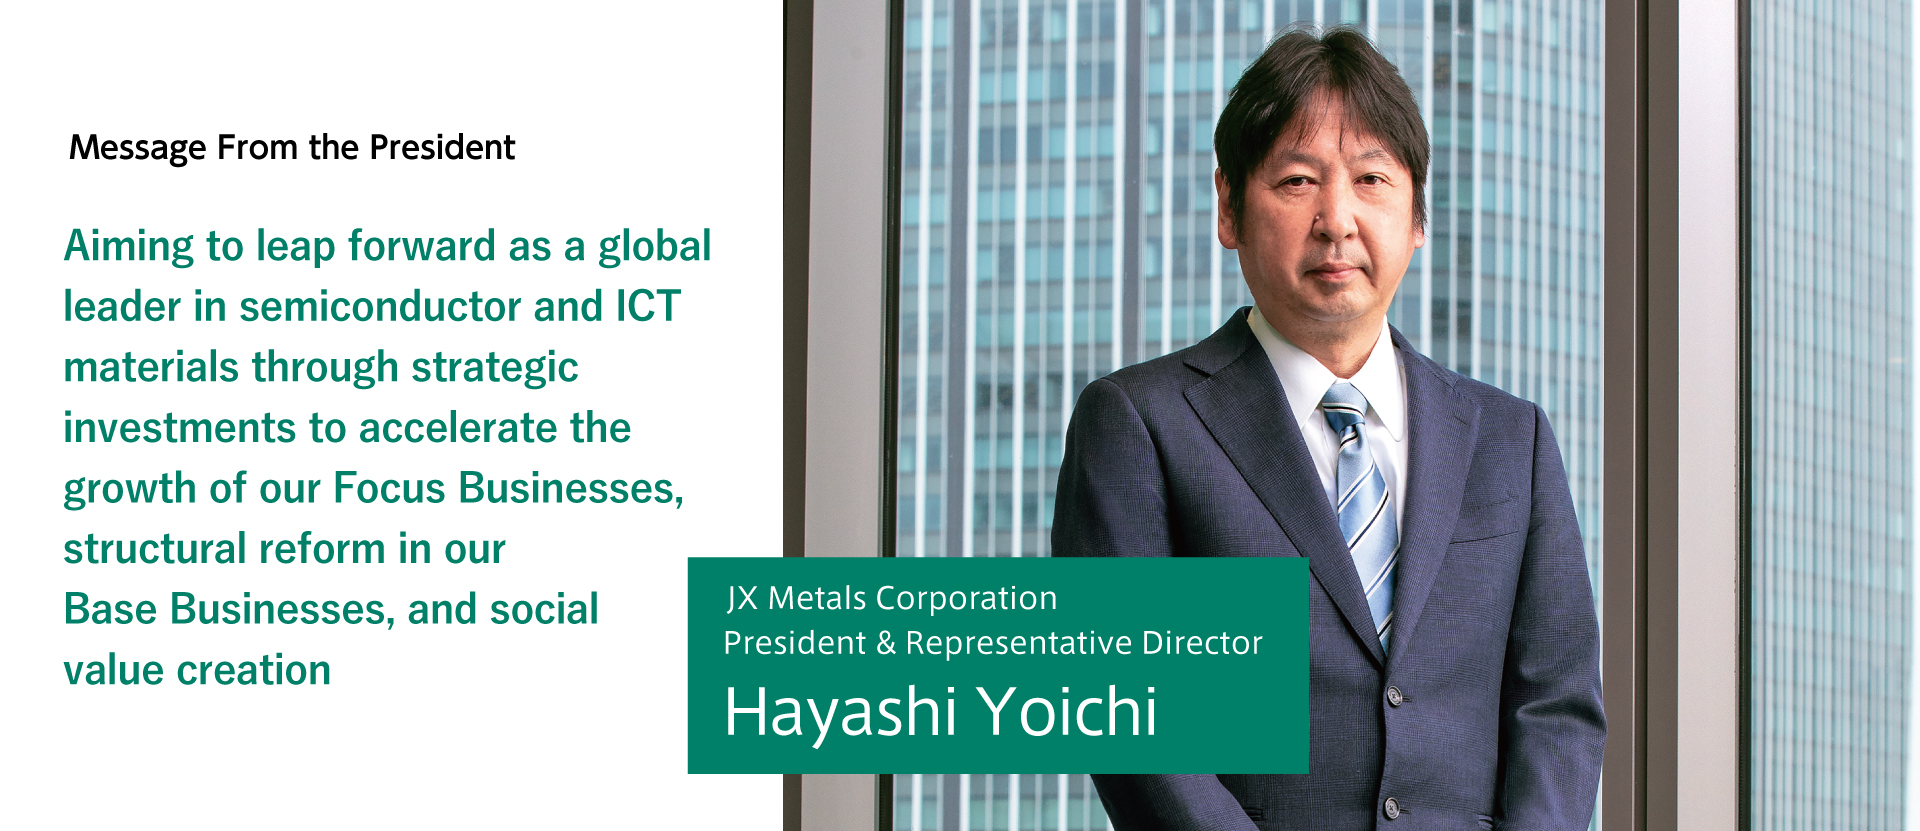 Aiming to leap forward as a global leader in semiconductor and ICT materials through strategic investments to accelerate the growth of our Focus Businesses, structural reform in our Base Businesses, and social value creation. JX Metals Corporation President & Representative Director Yoichi Hayashi